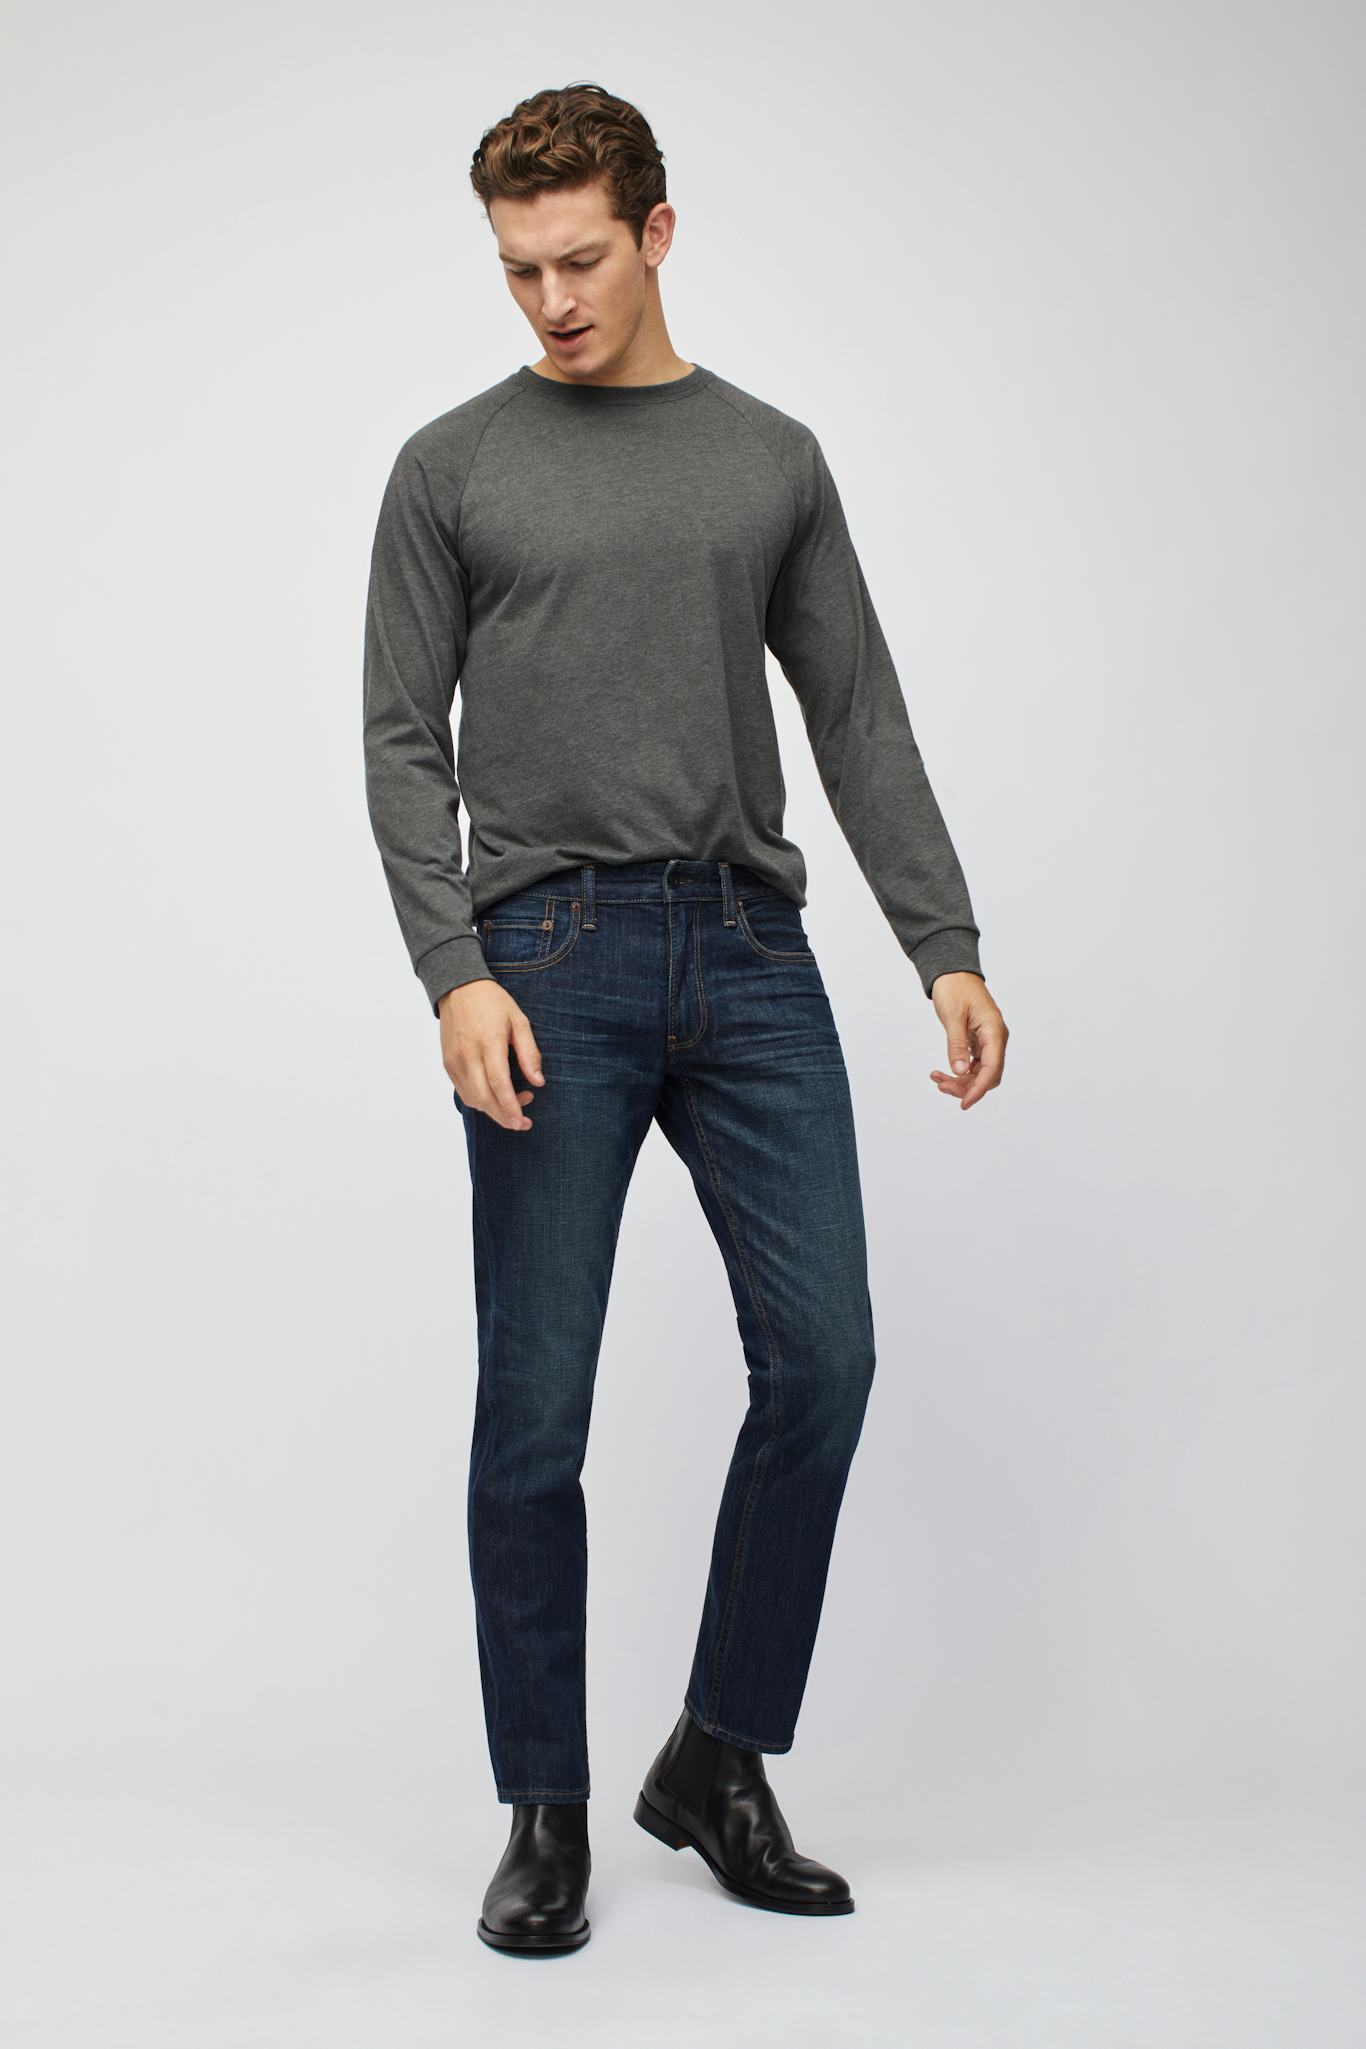 The Blue Jean - Classic Denim in Multiple Washes | Bonobos